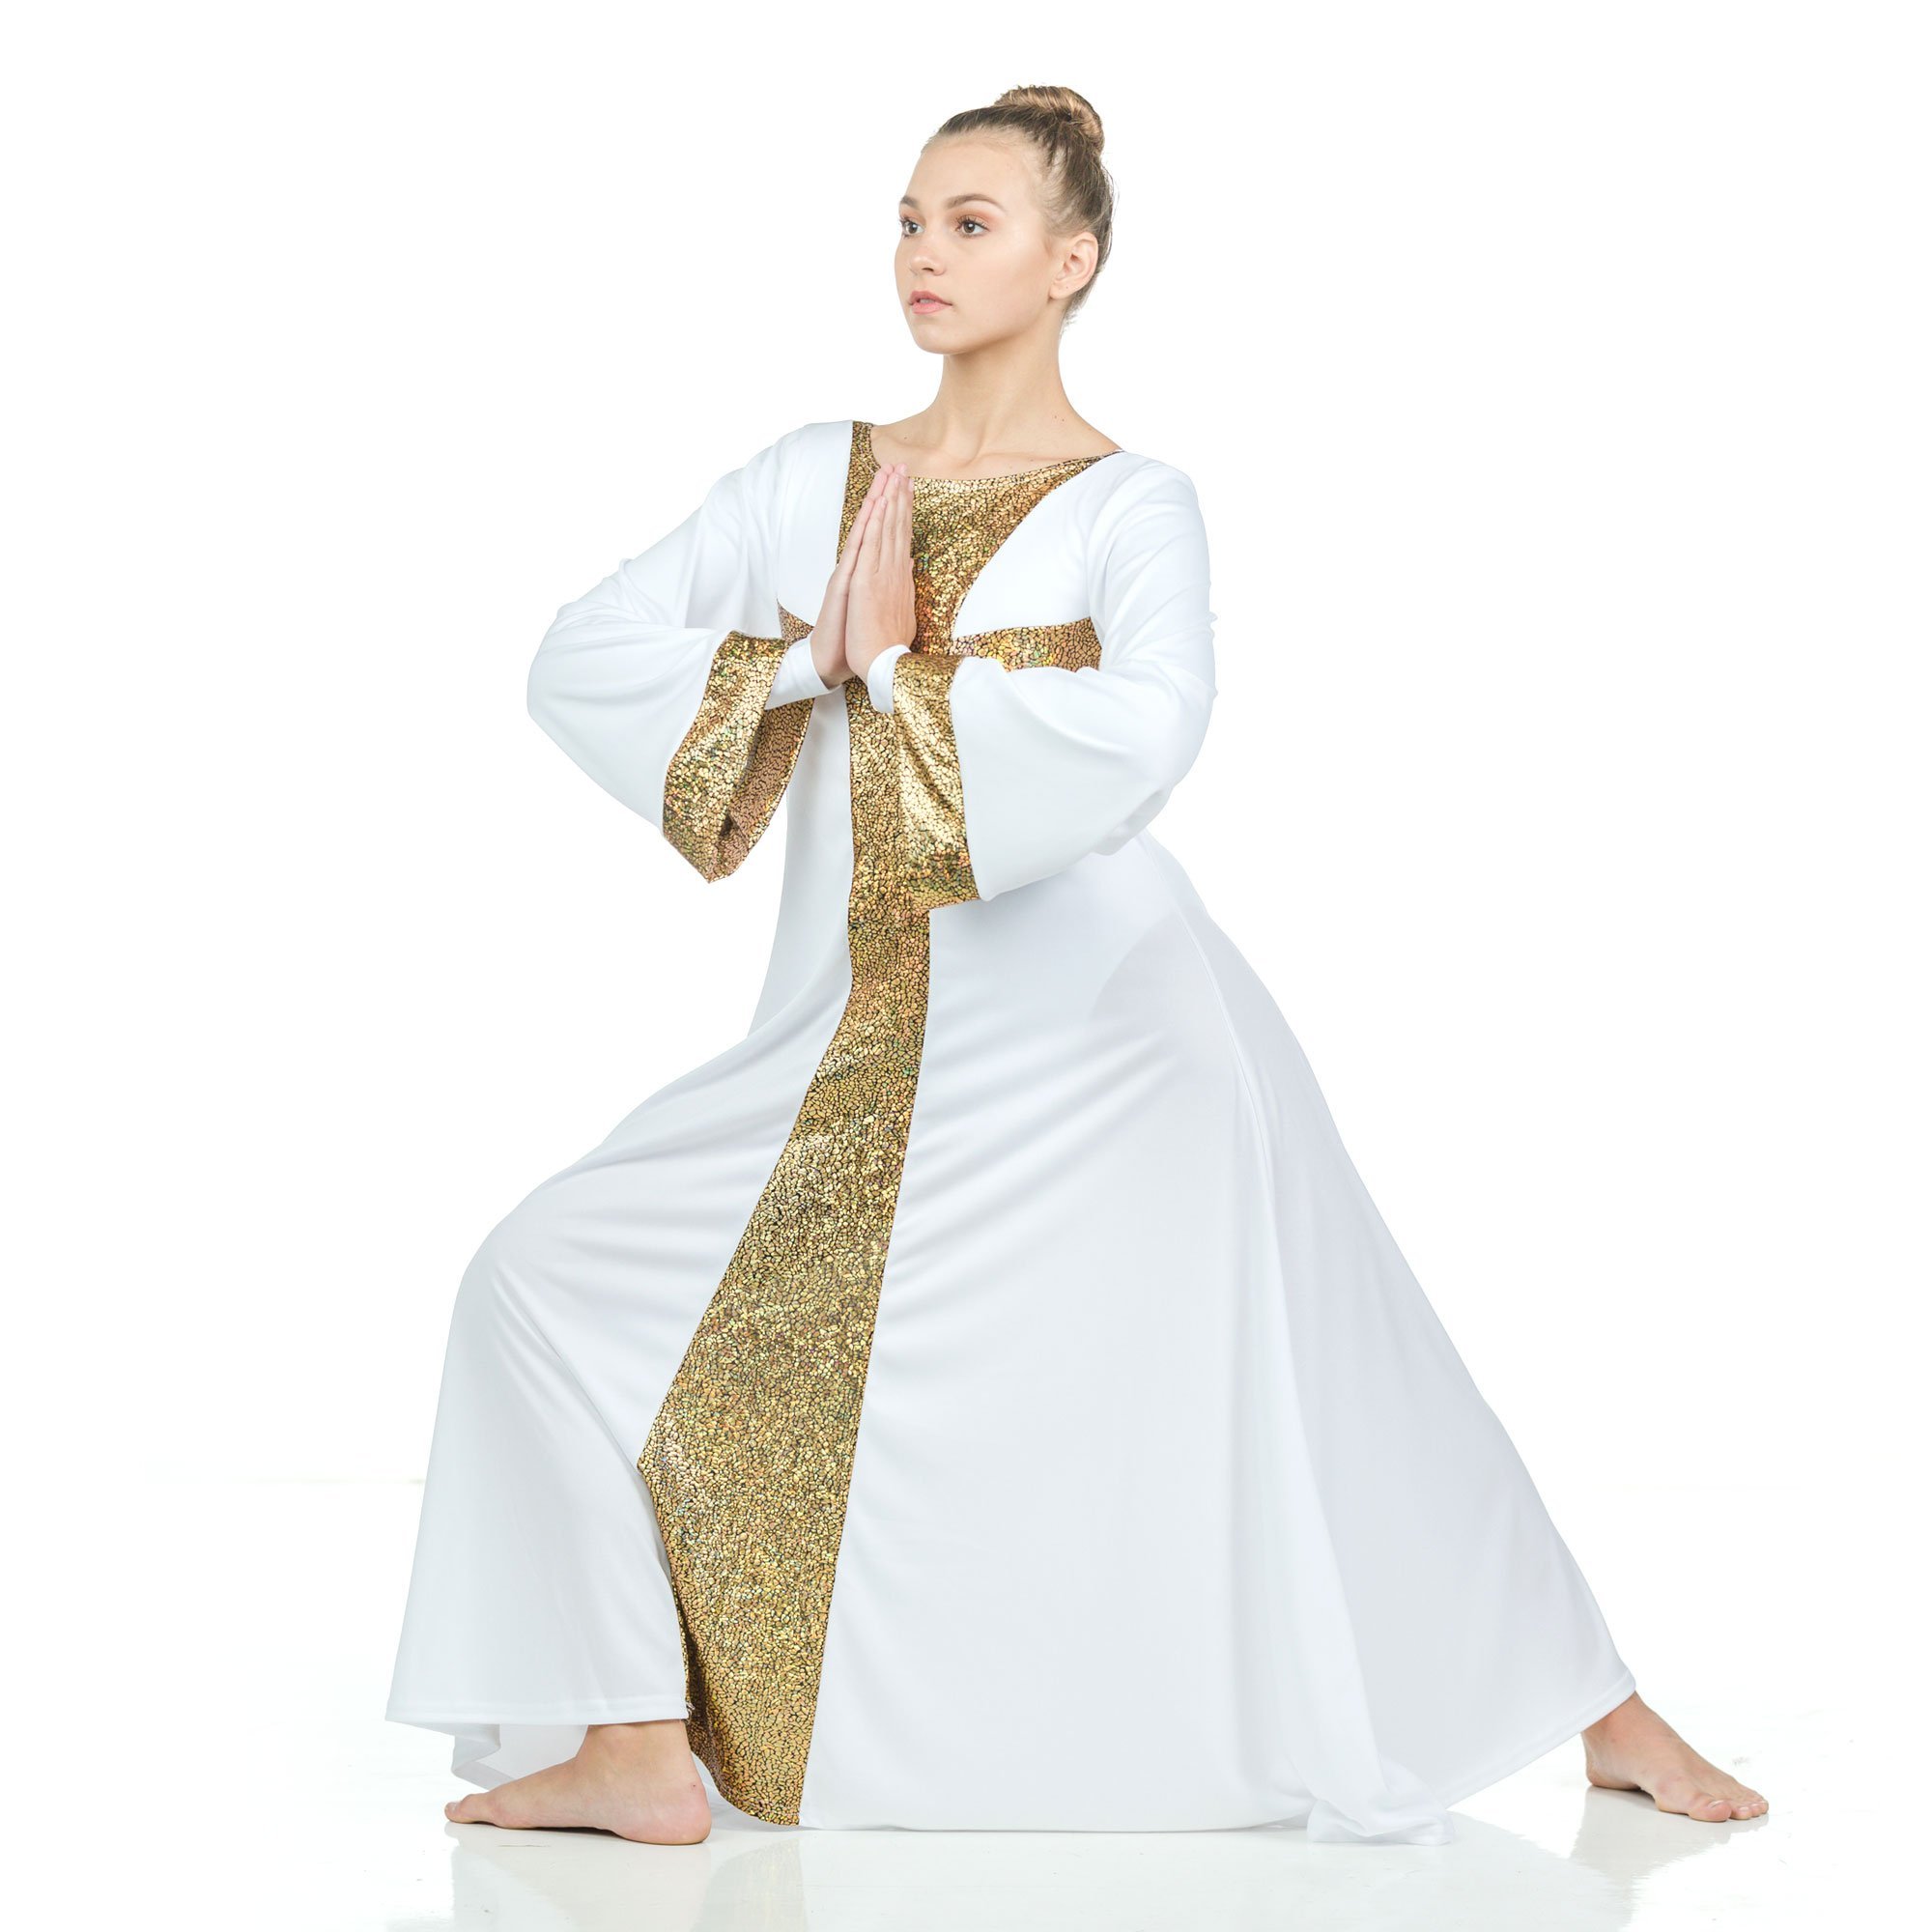 Danzcue Praise Dance Shimmery Cross Long Sleeve Dress - Click Image to Close